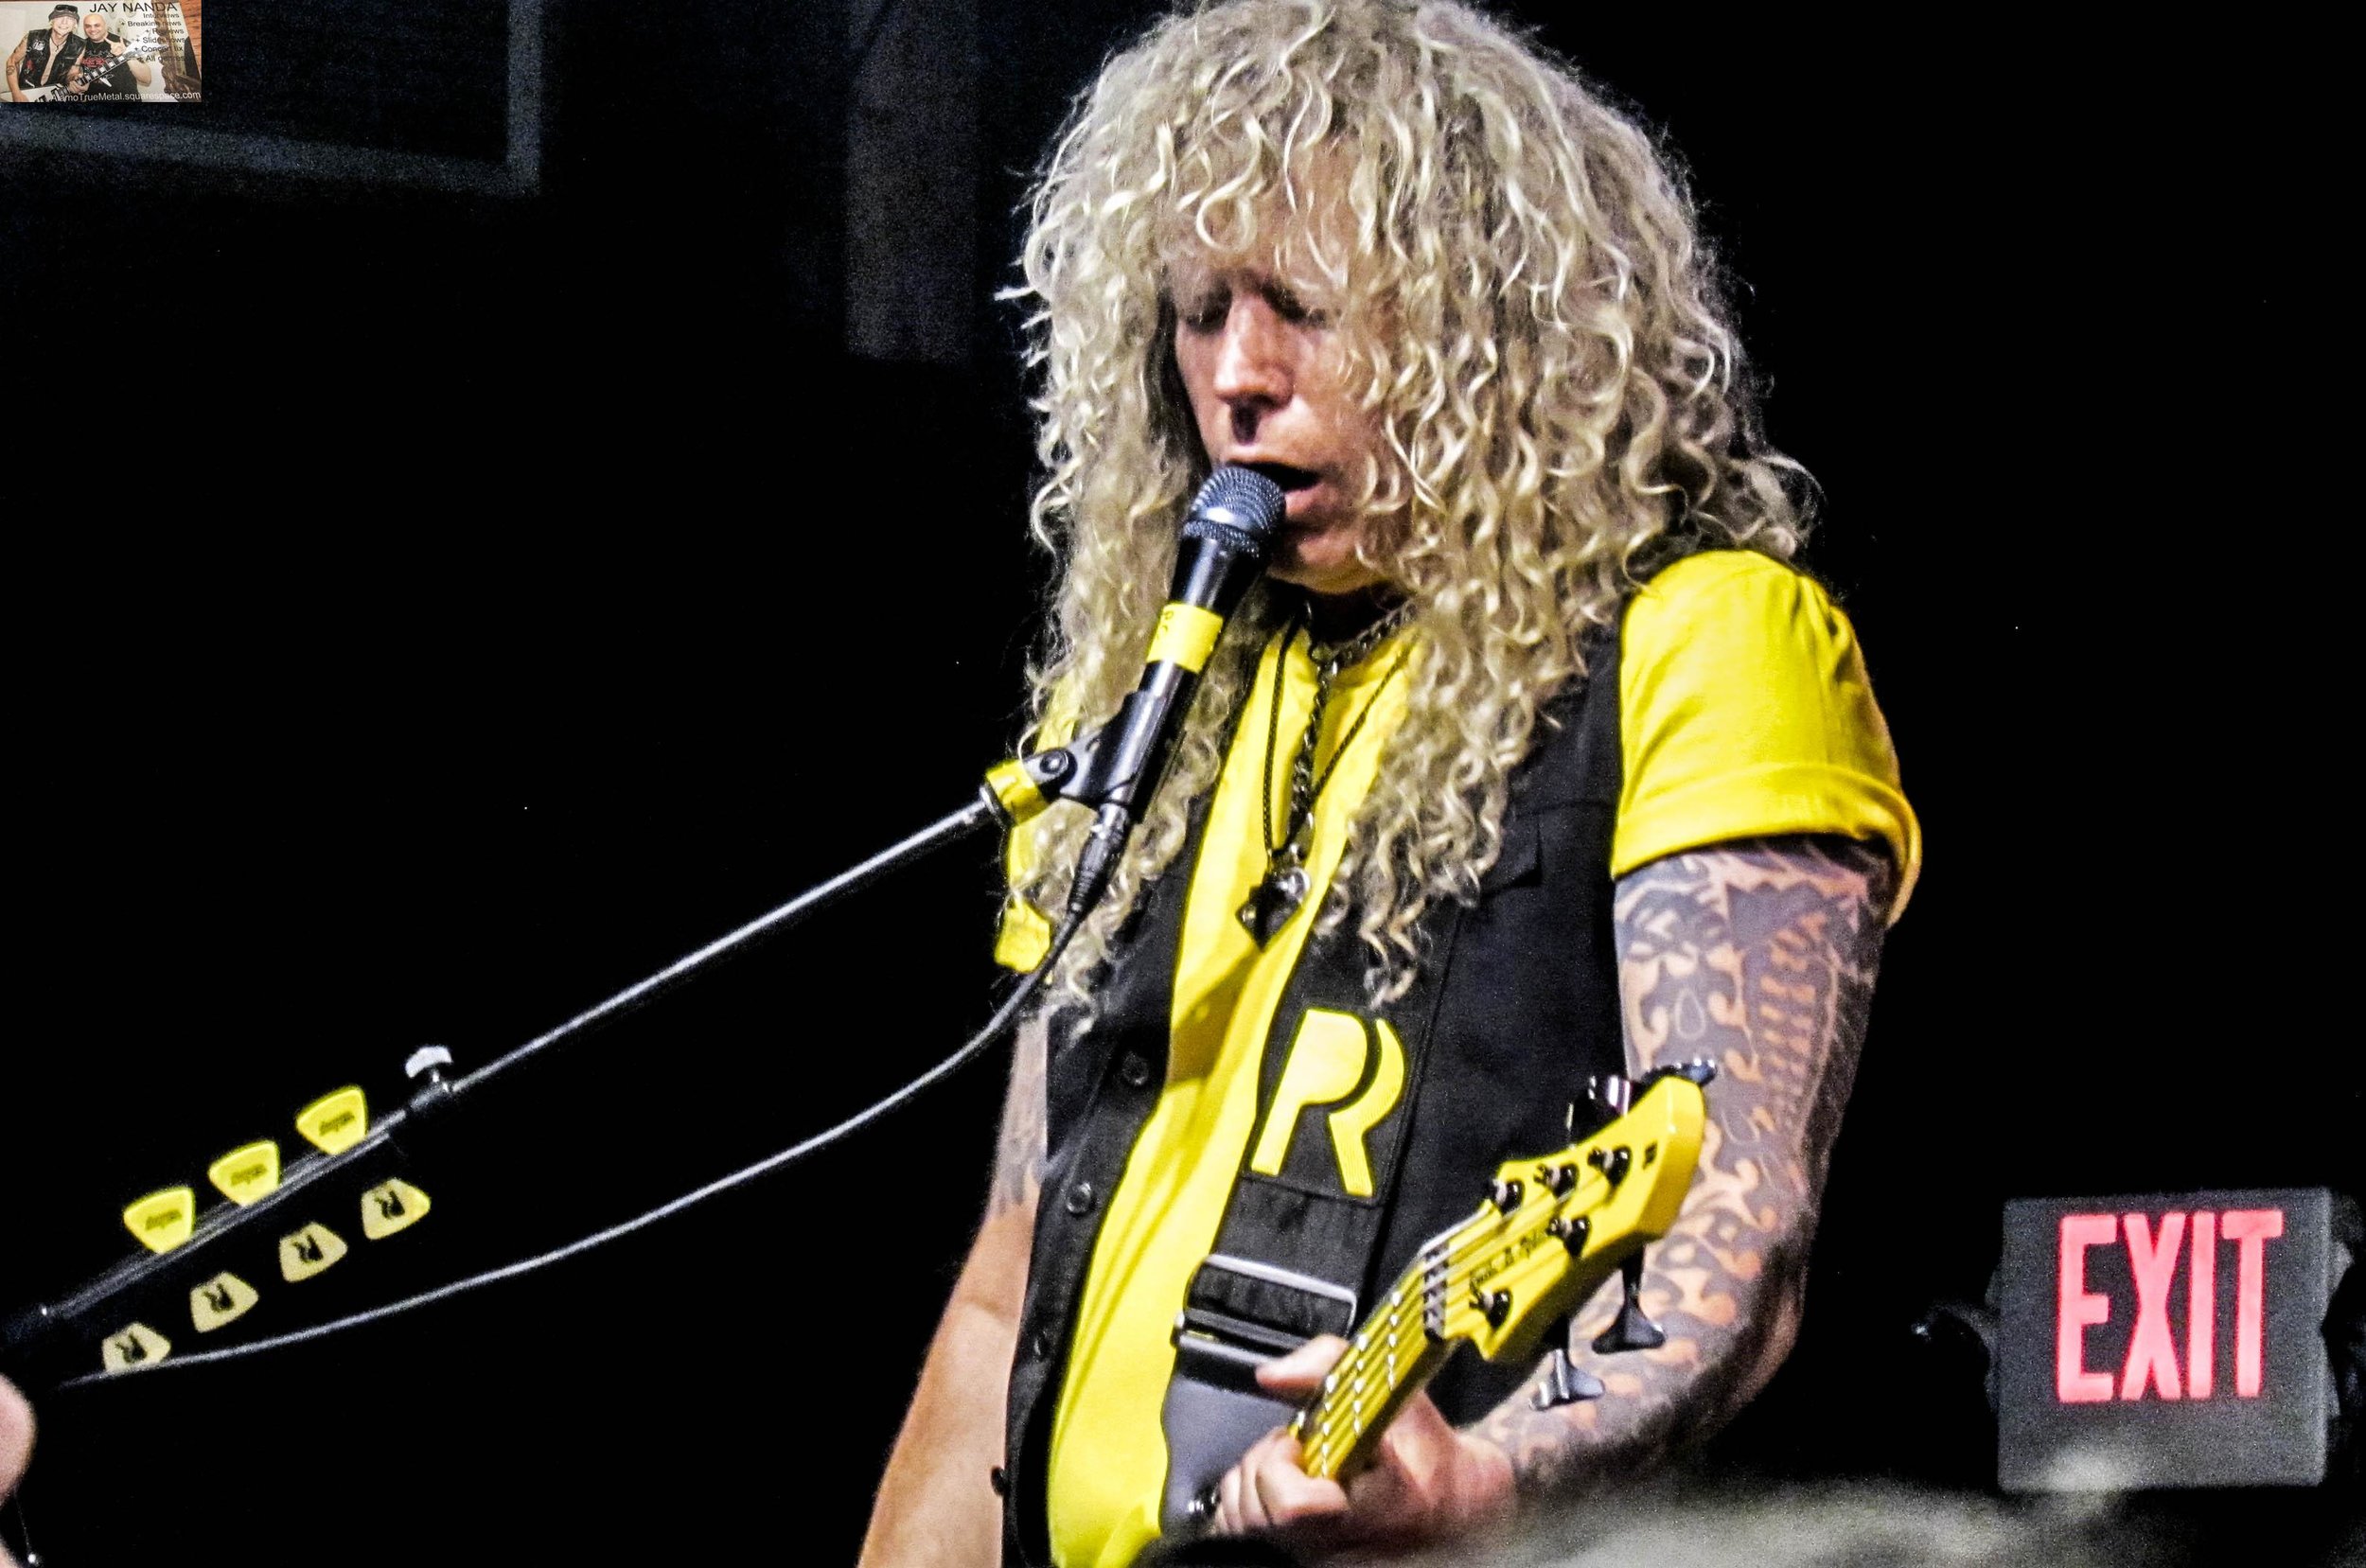  New bassist Perry Richardson, formerly of Firehouse, has just embarked on his first tour as a member of Stryper after replacing original member Tim Gaines.  